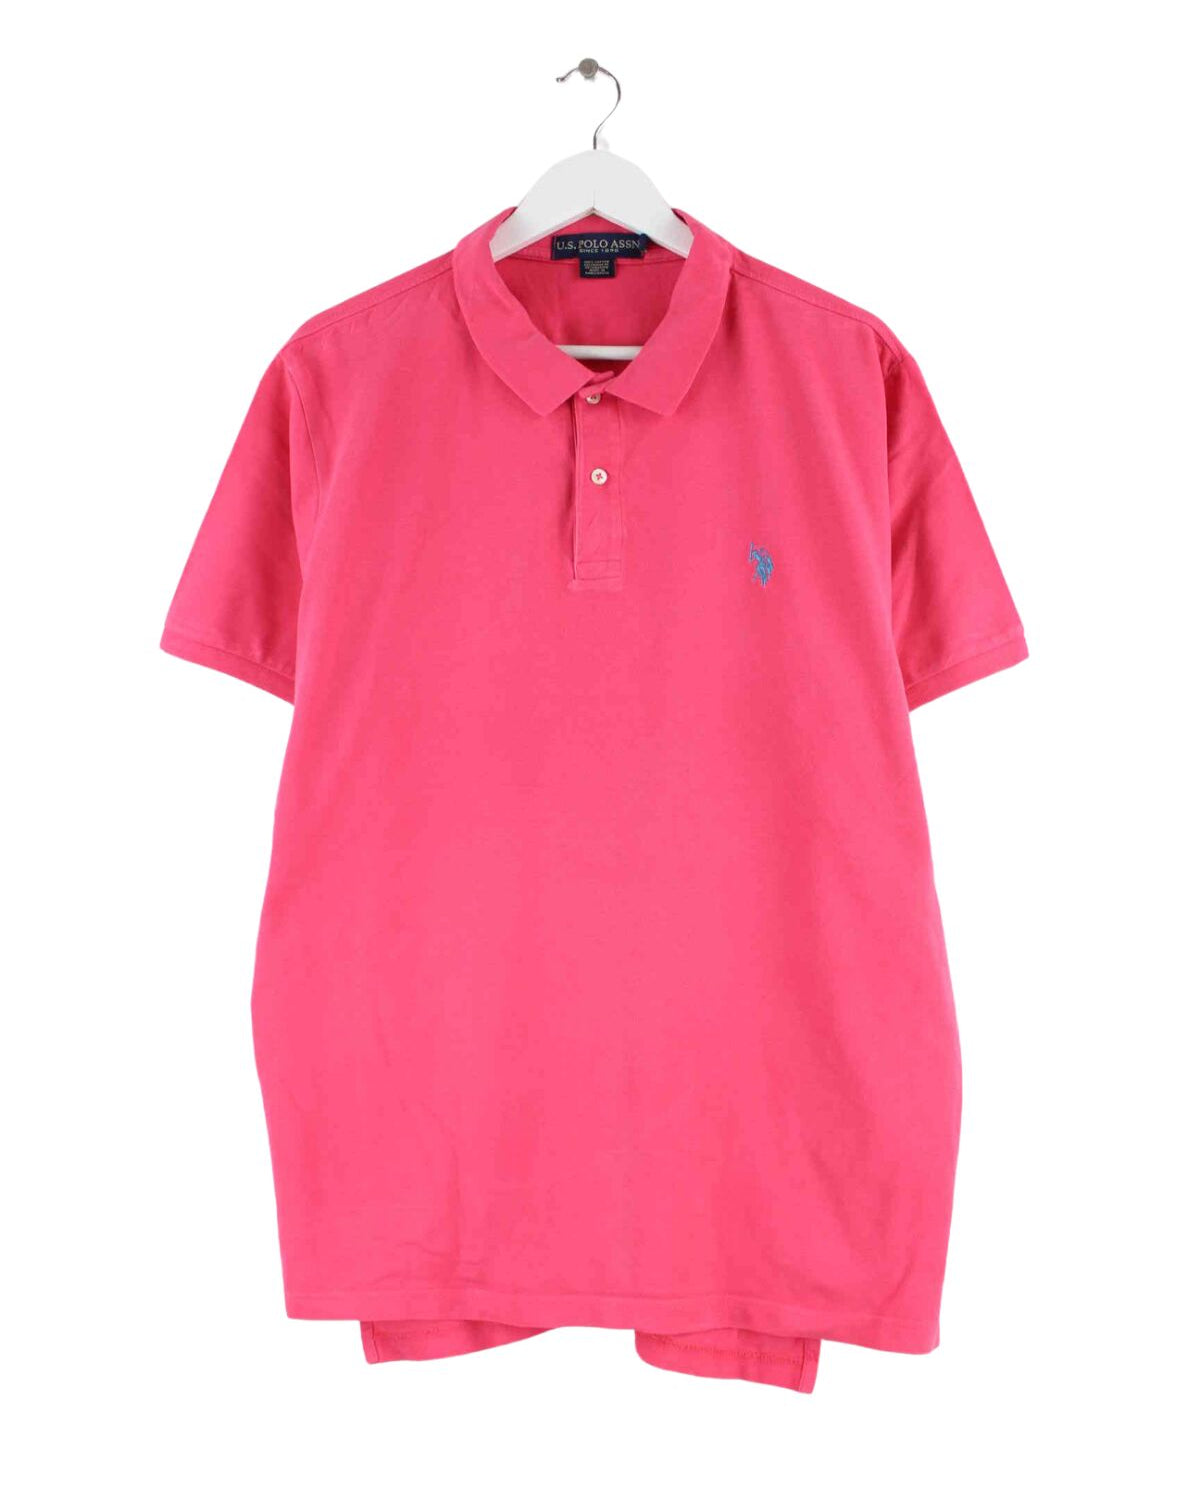 U.S. Polo ASSN. y2k Basic Polo Pink XL (front image)